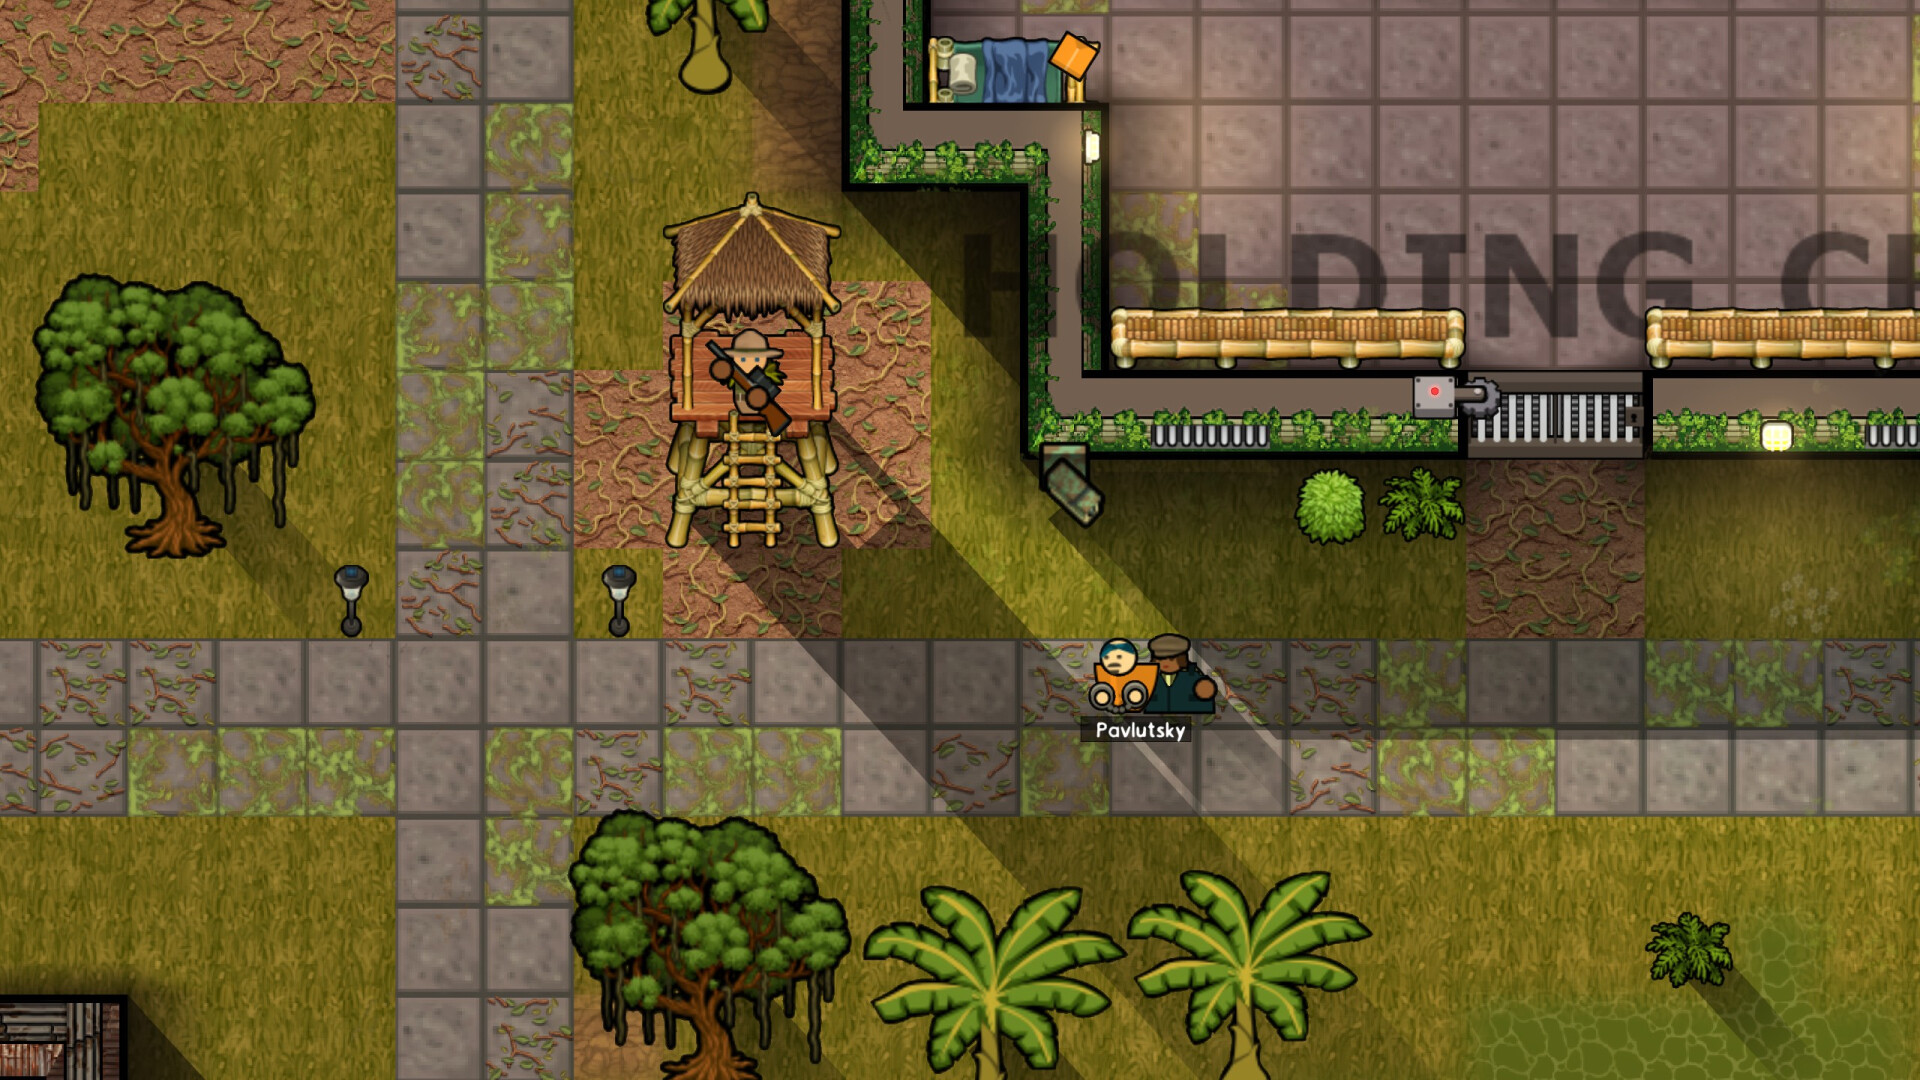 download prison architect jungle pack-gog full pc cracked direct links dlgames - download all your games for free